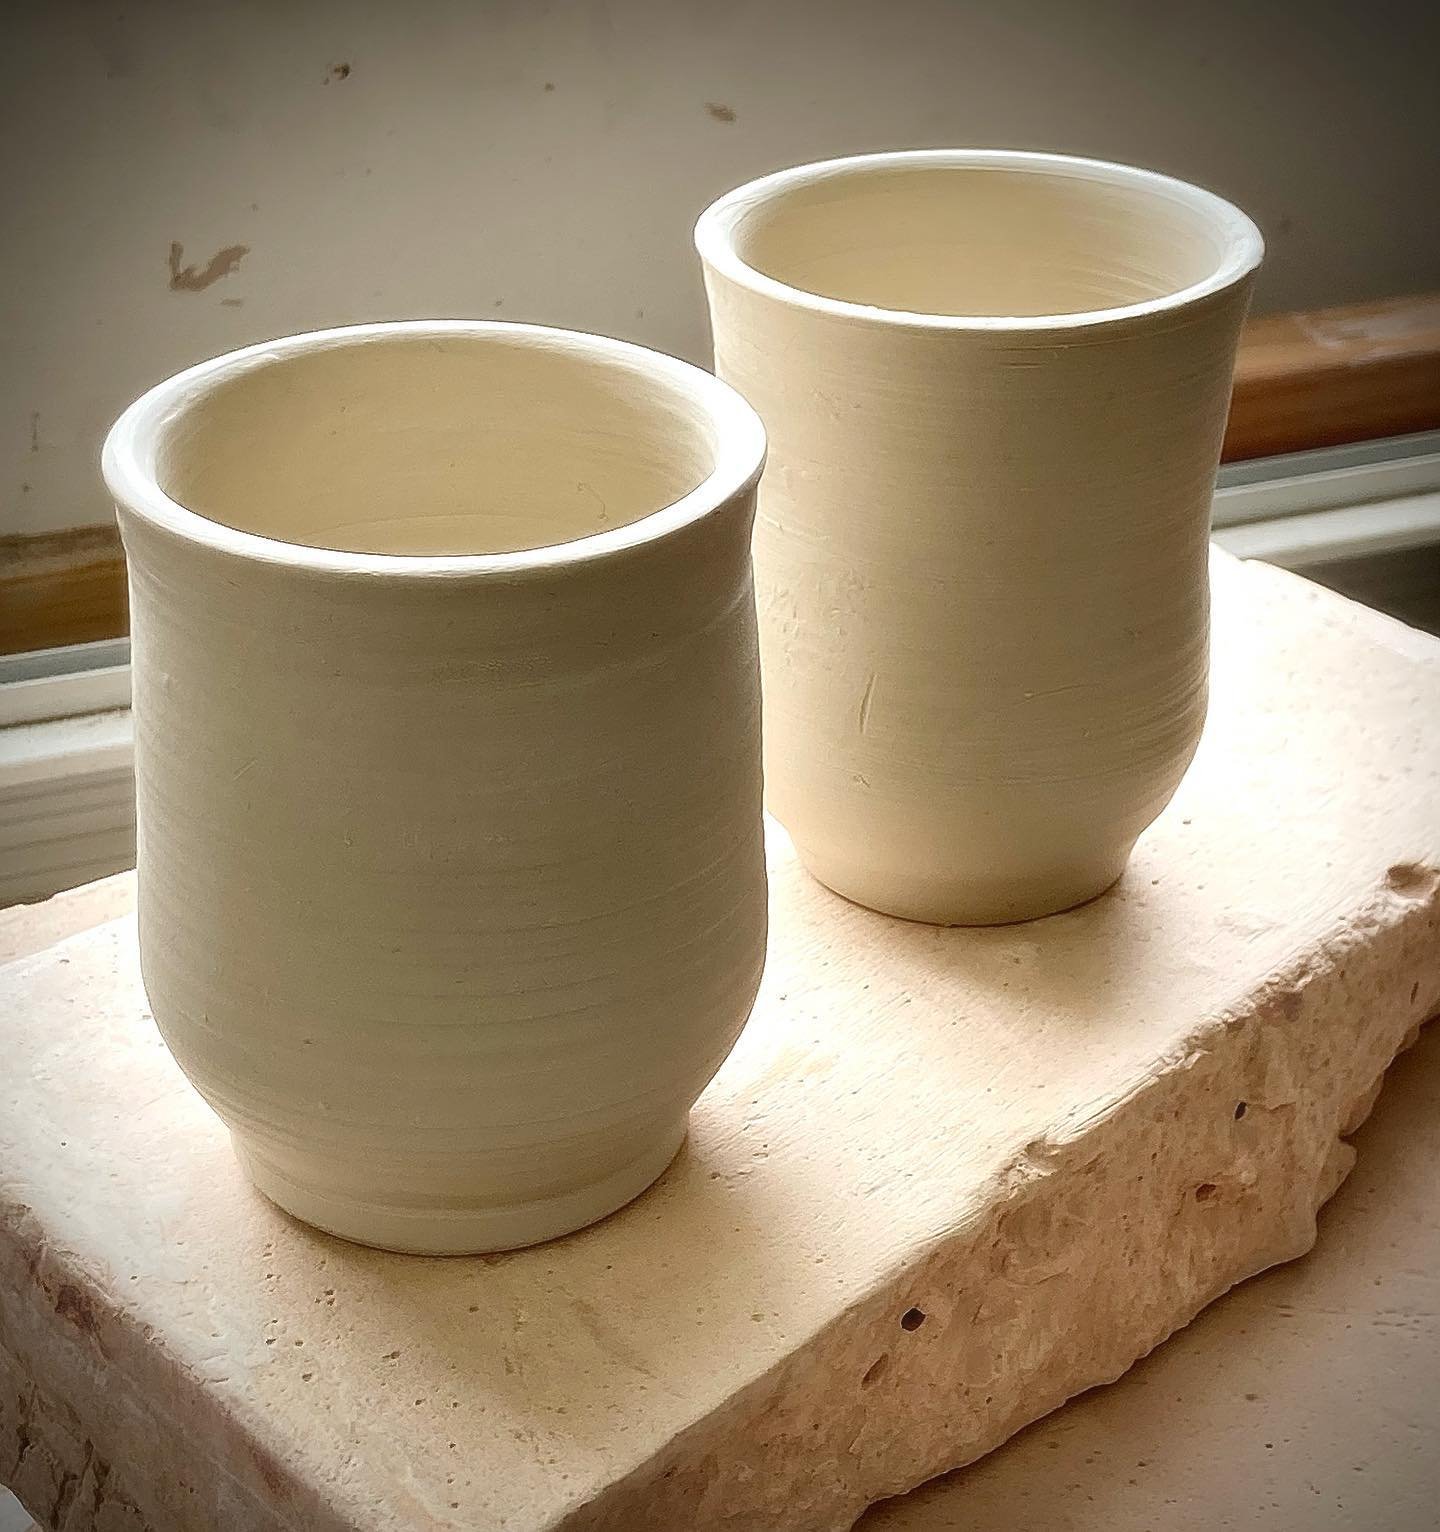 Been distracted by the wheel, trimming morning, definitely have spots to get better at... 🐢 but i do love figuring it out.
Hope your doing something that makes you happy!
.
.
.
.
.
.
#wheelthrowing #practicepracticepractice #porcelainclay #pottery #